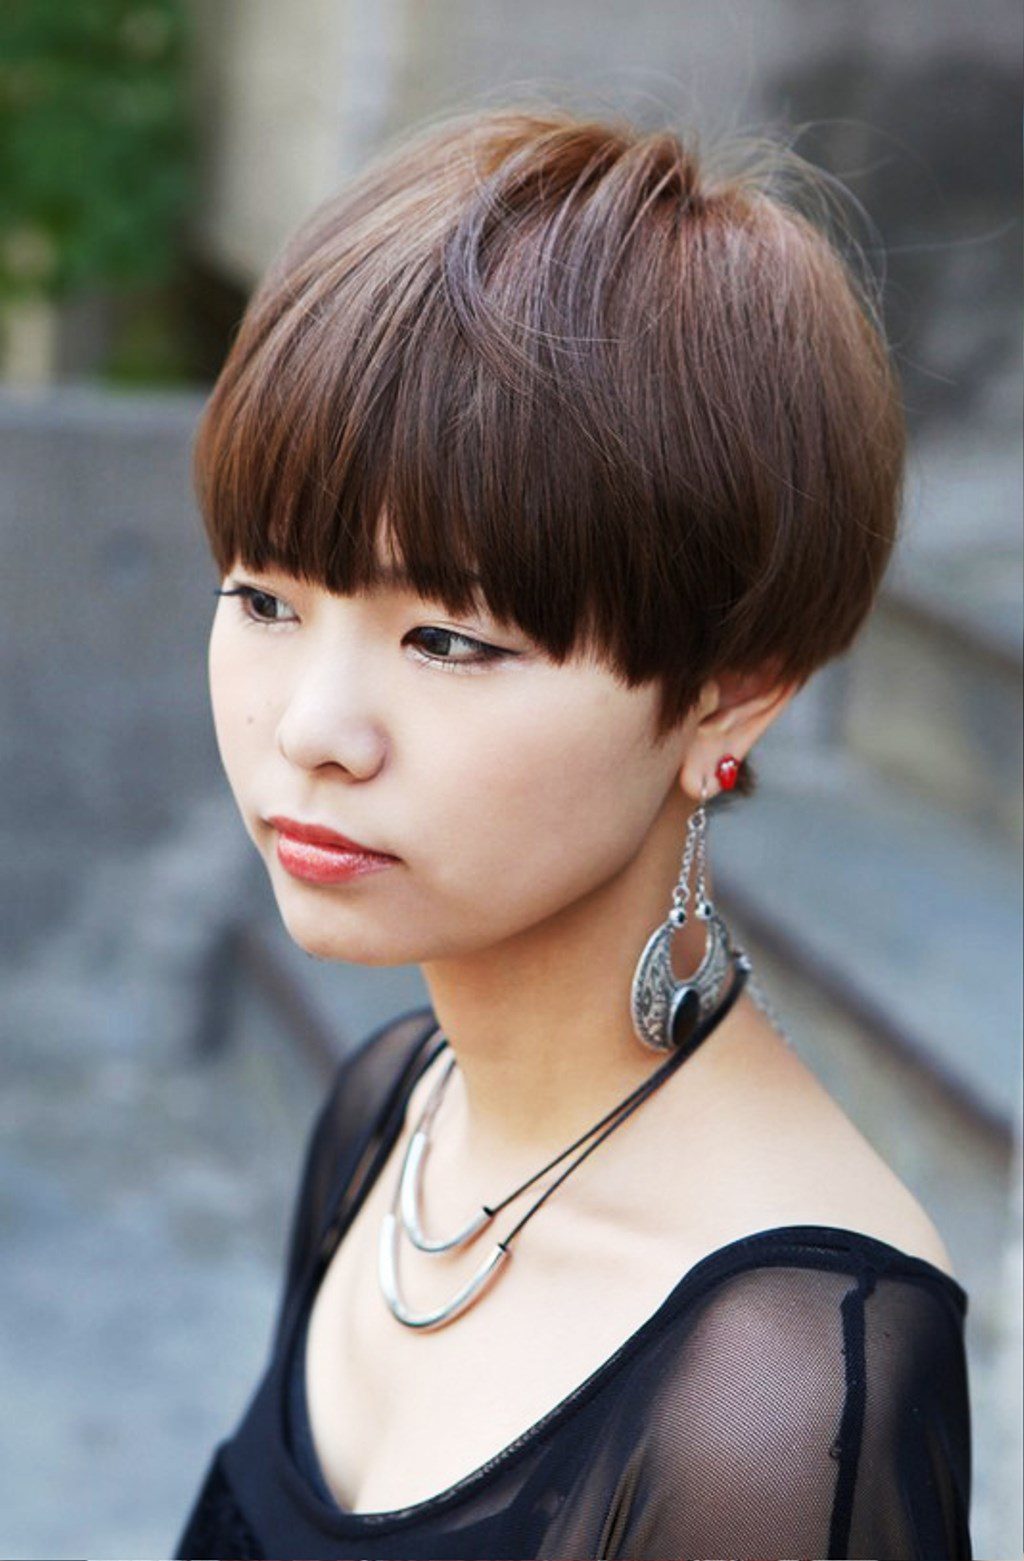 Cute Short Japanese Girls Hairstyle With Blunt Bangs1